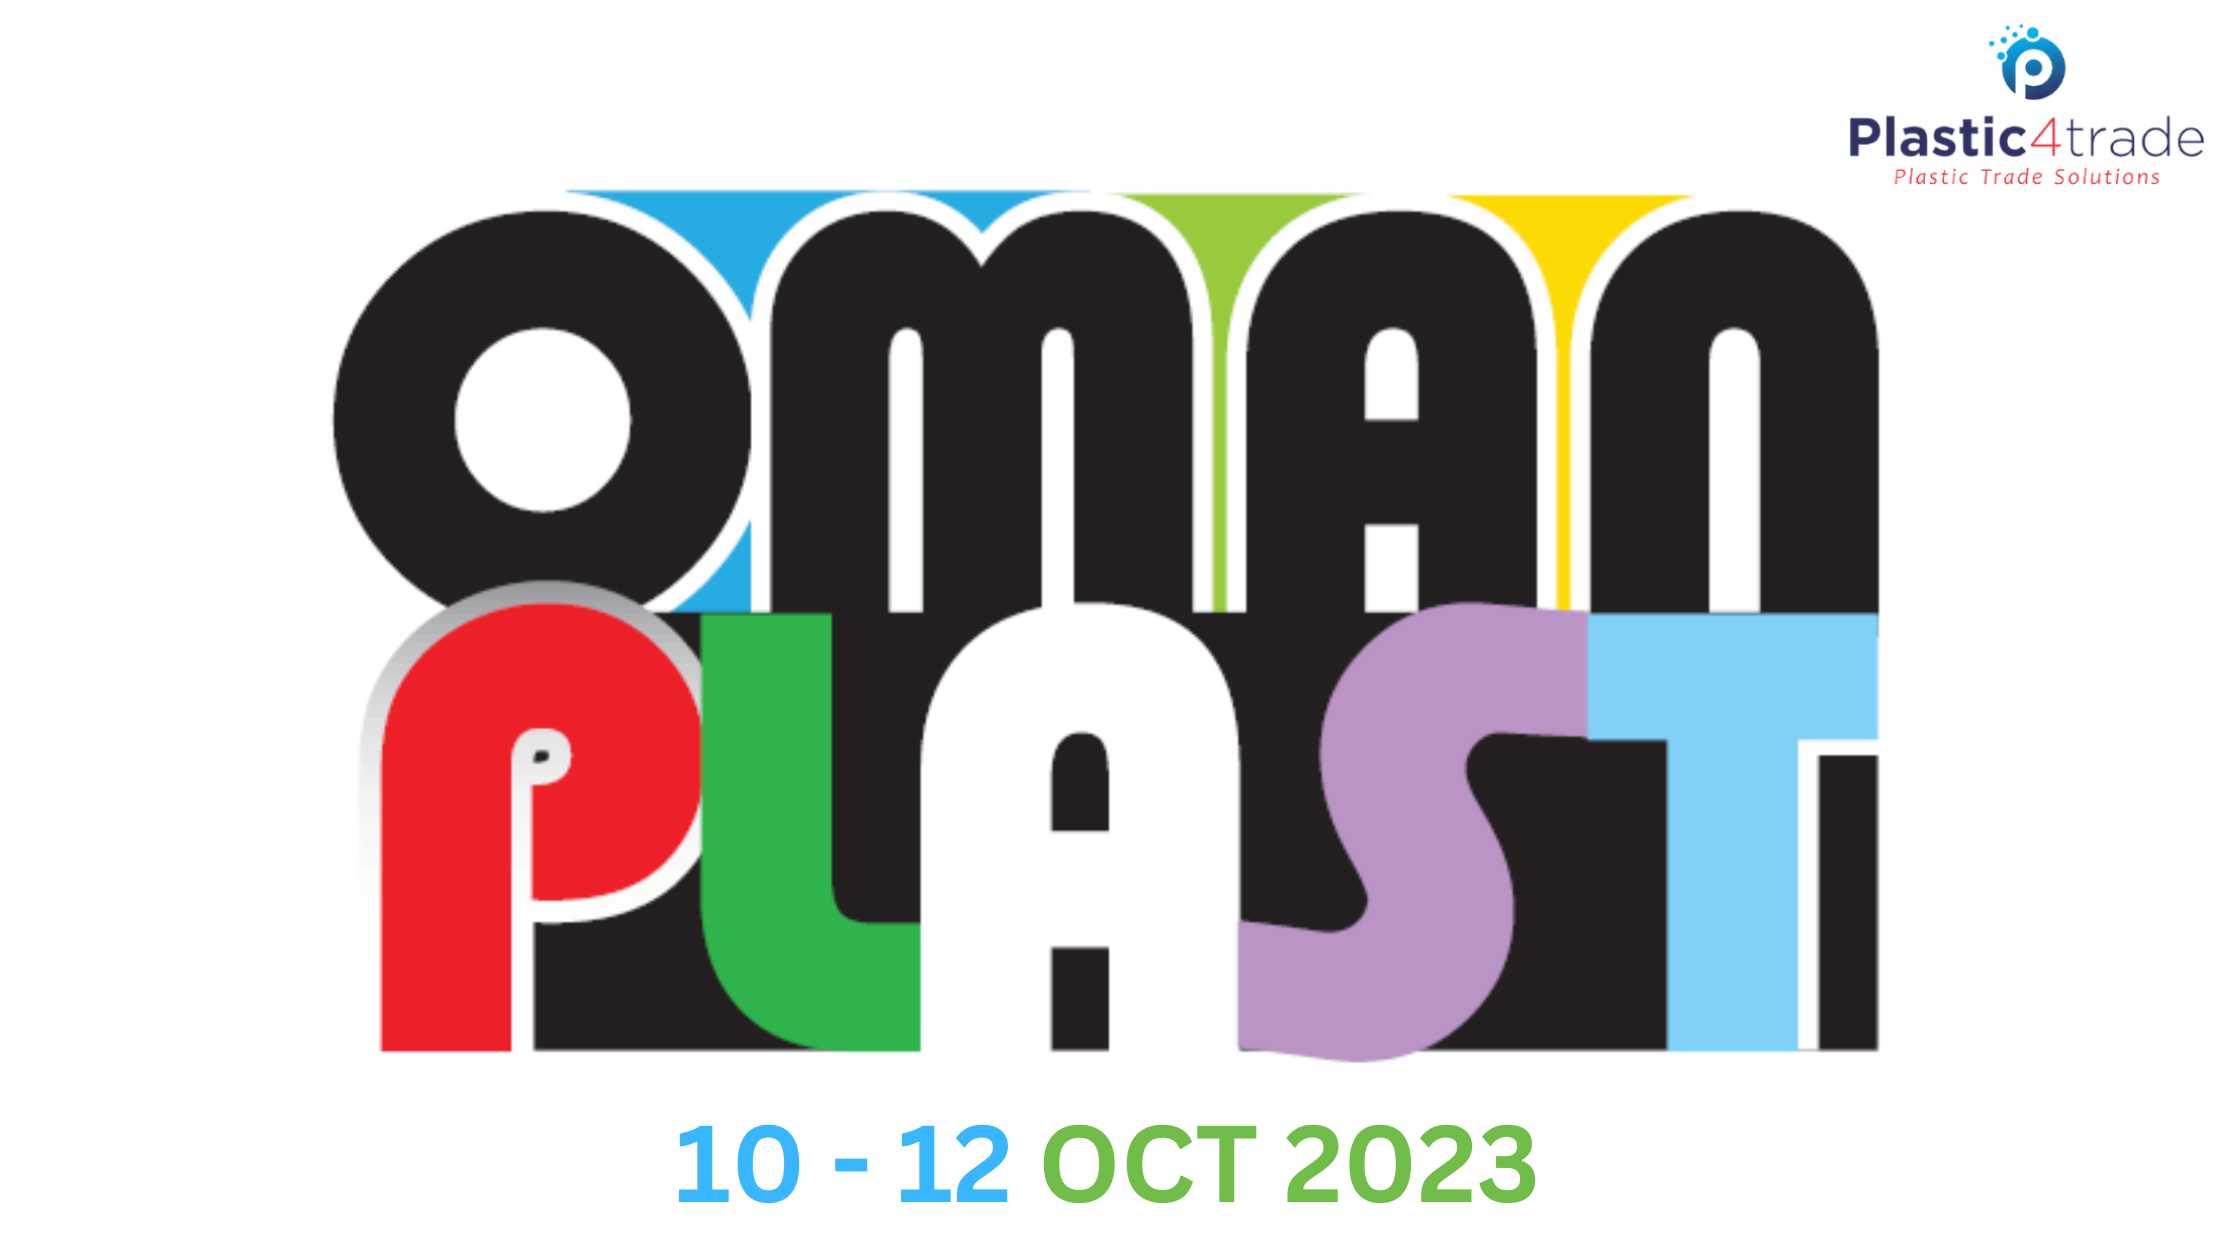 Oman Plast International Plastics, Rubber, Petrochemicals, Fertilizers, Recycling, Printing and Packaging Exhibition 2023 Plastic4trade